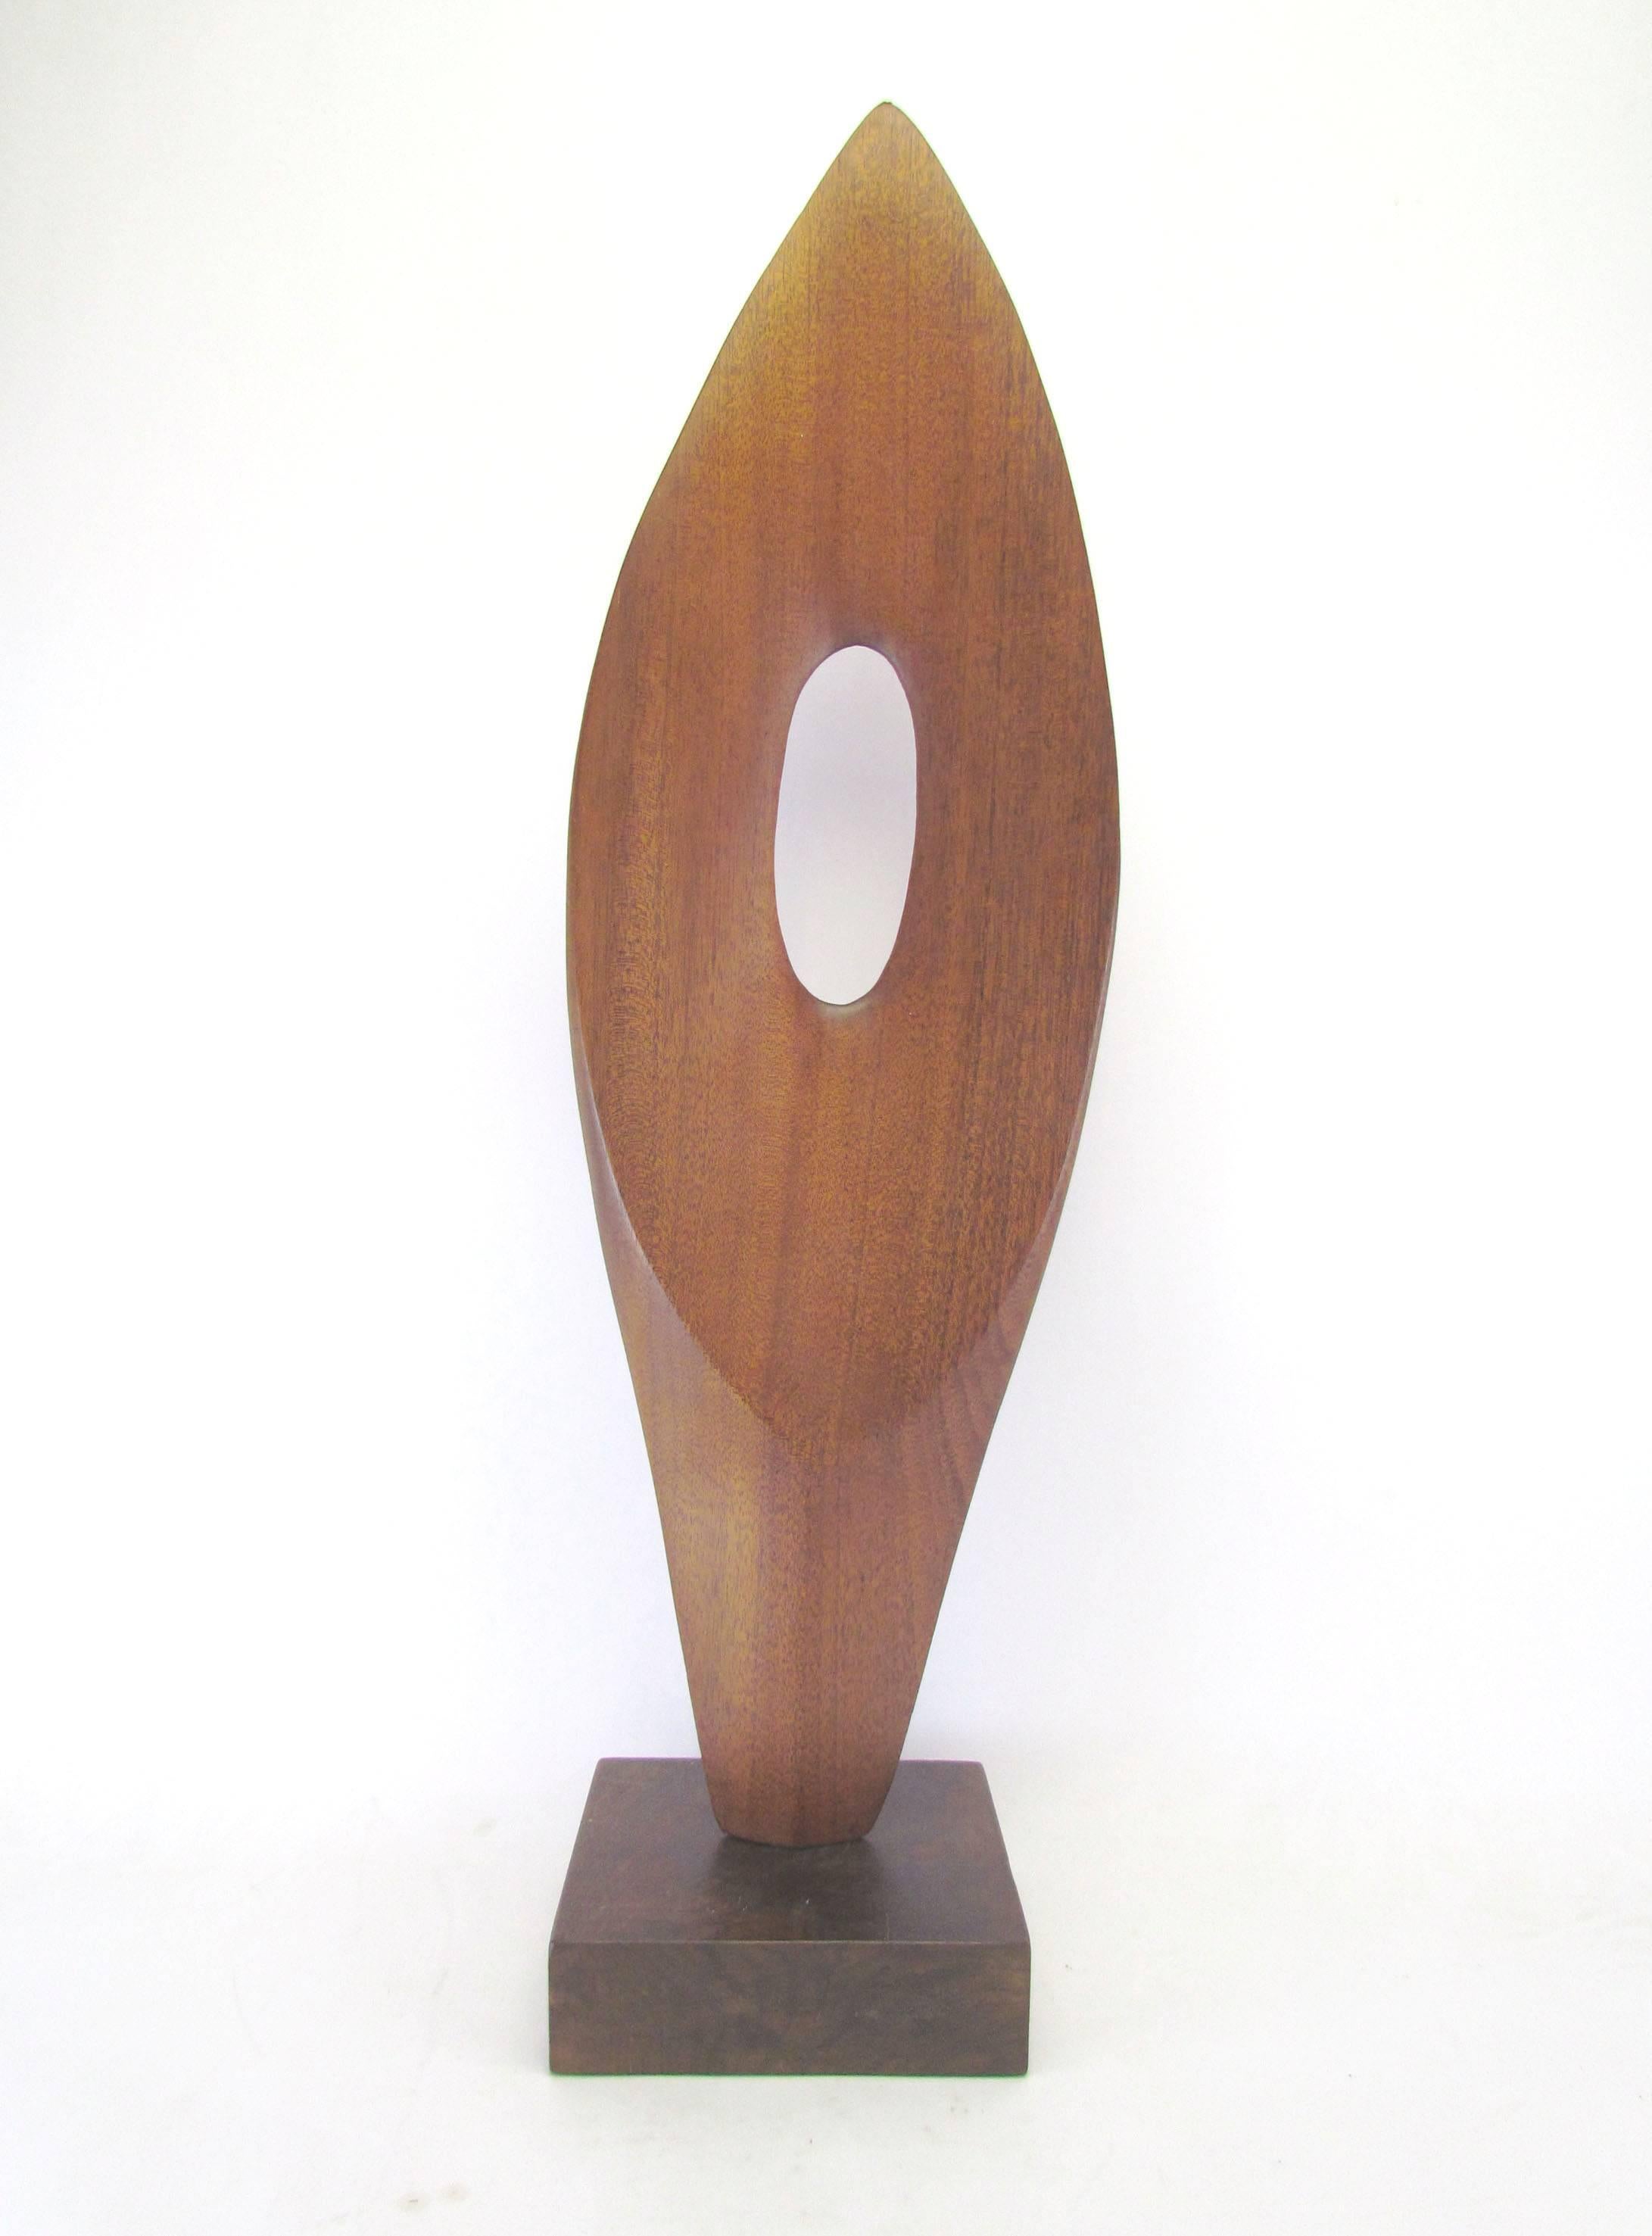 Sensuous modernist carved teak sculpture signed C.T. Armstrong and dated 1973.